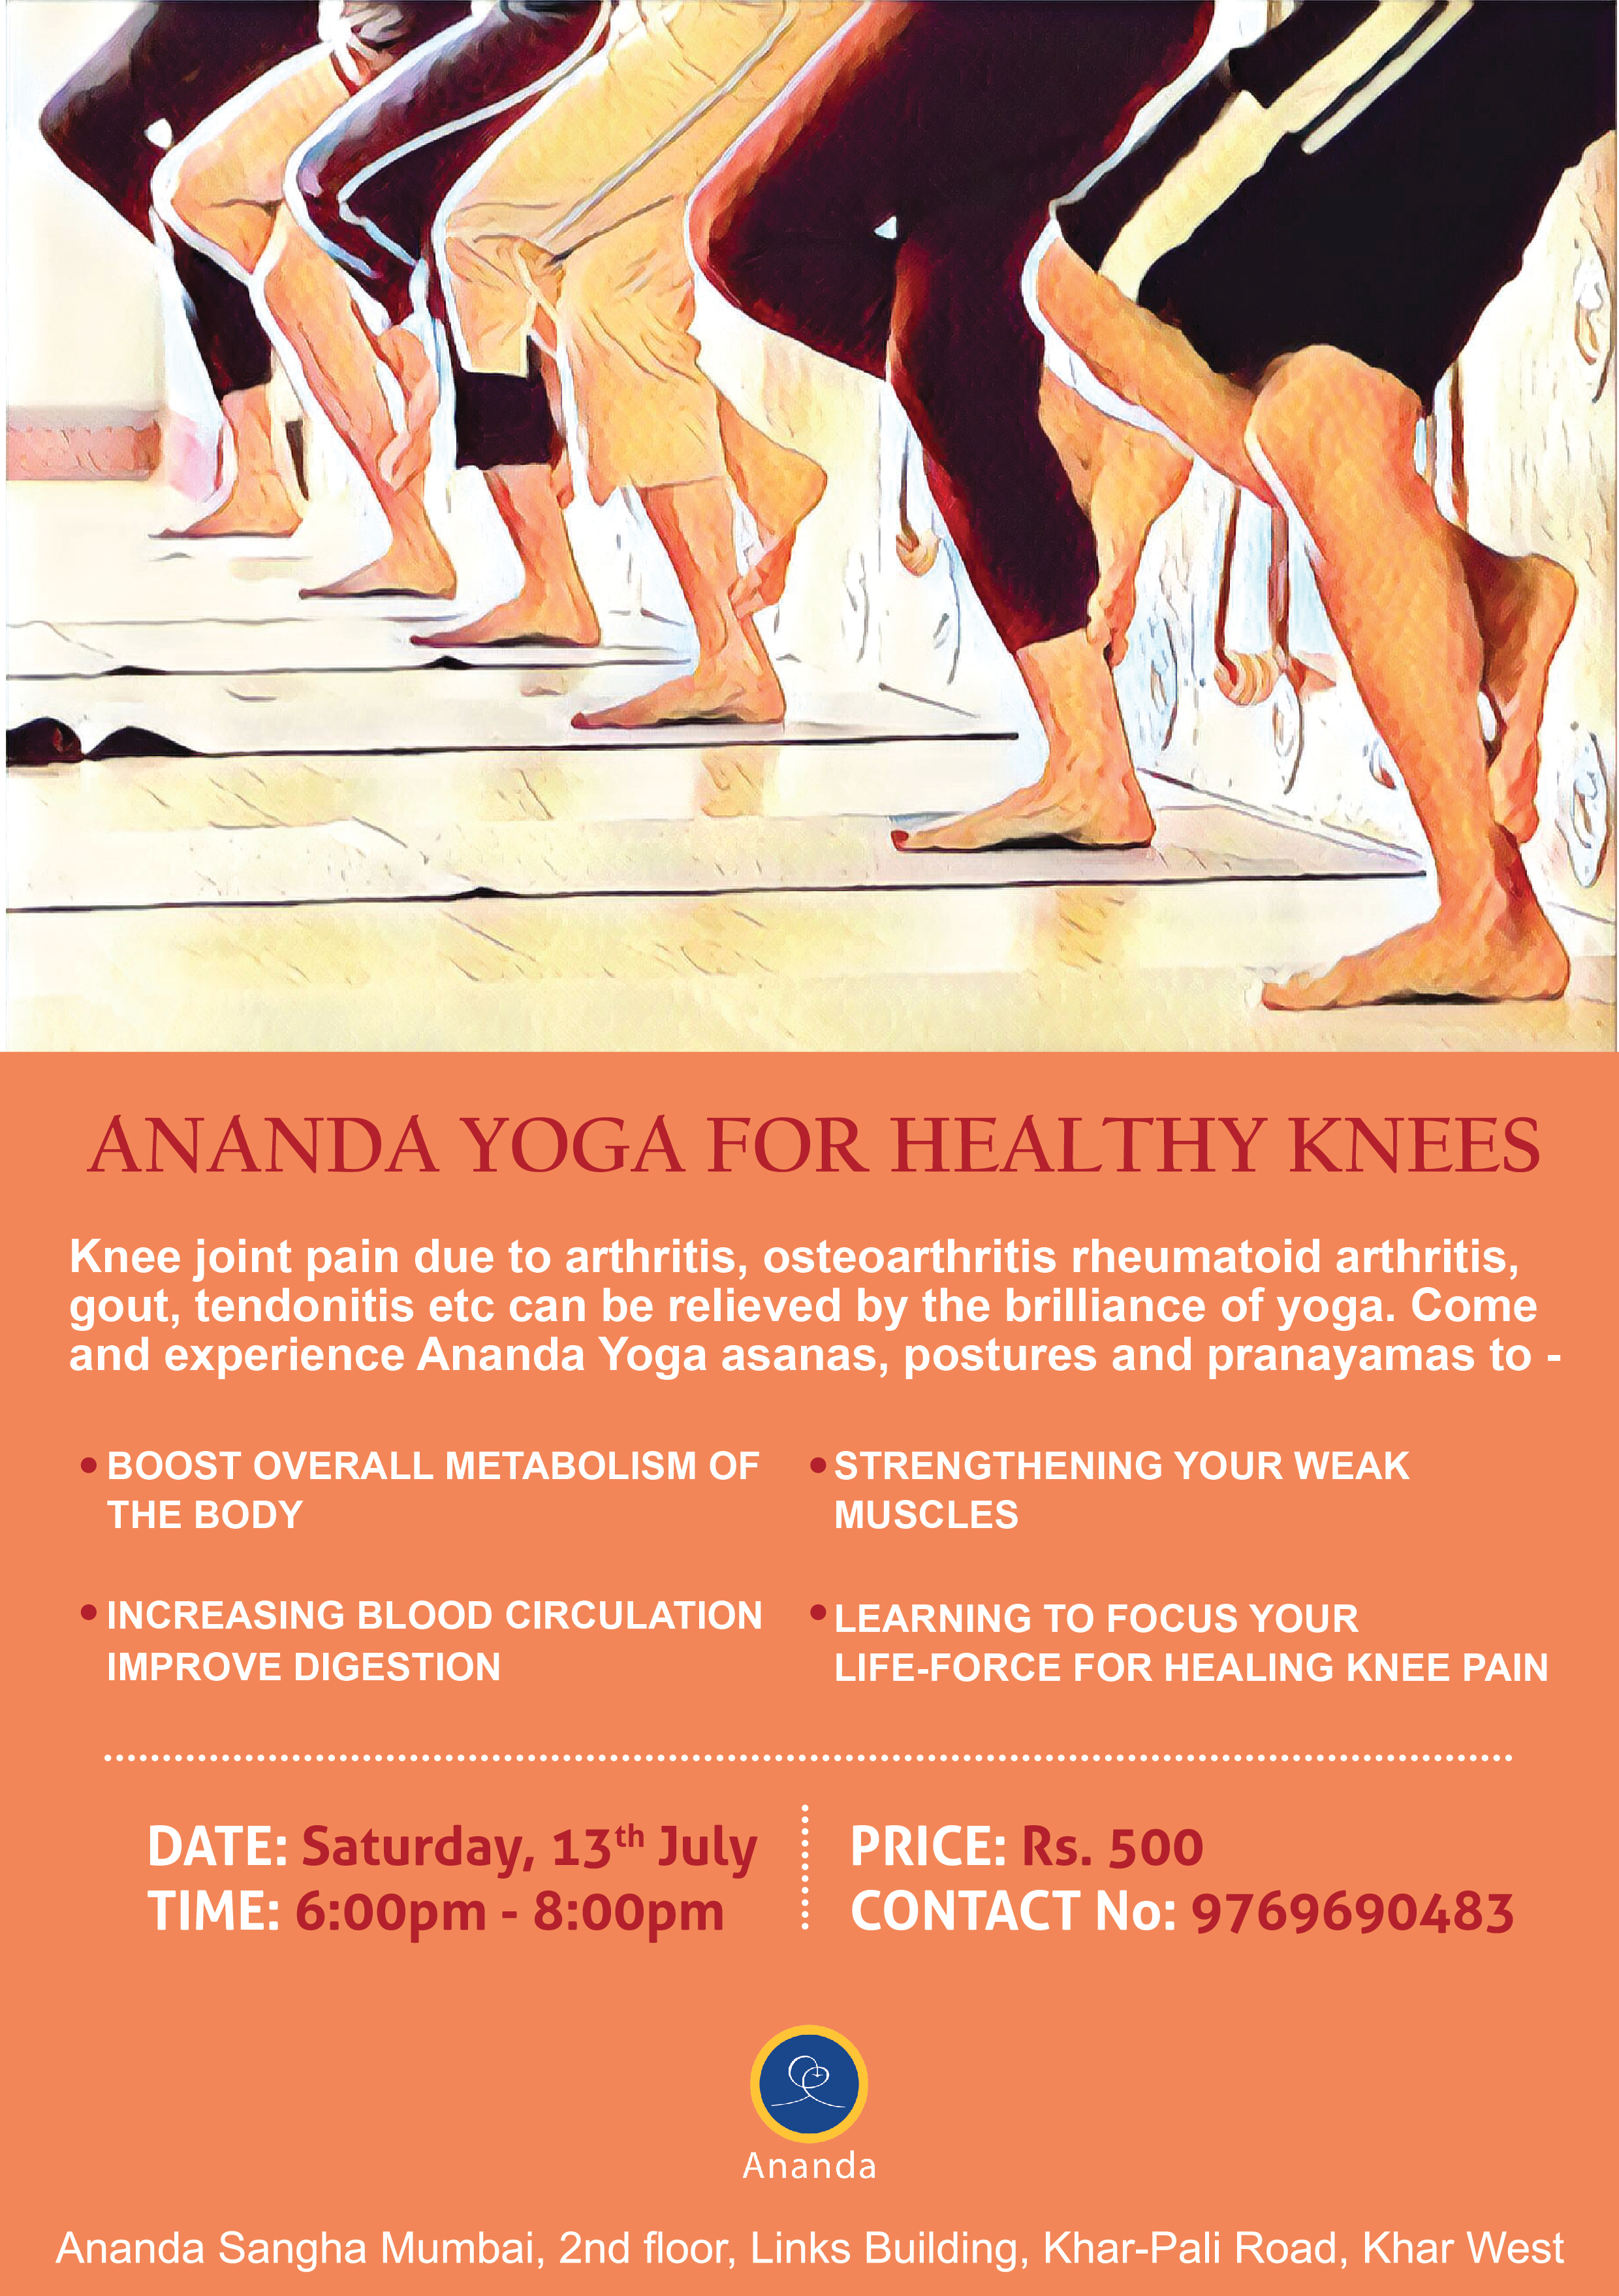 What is Ananda Yoga